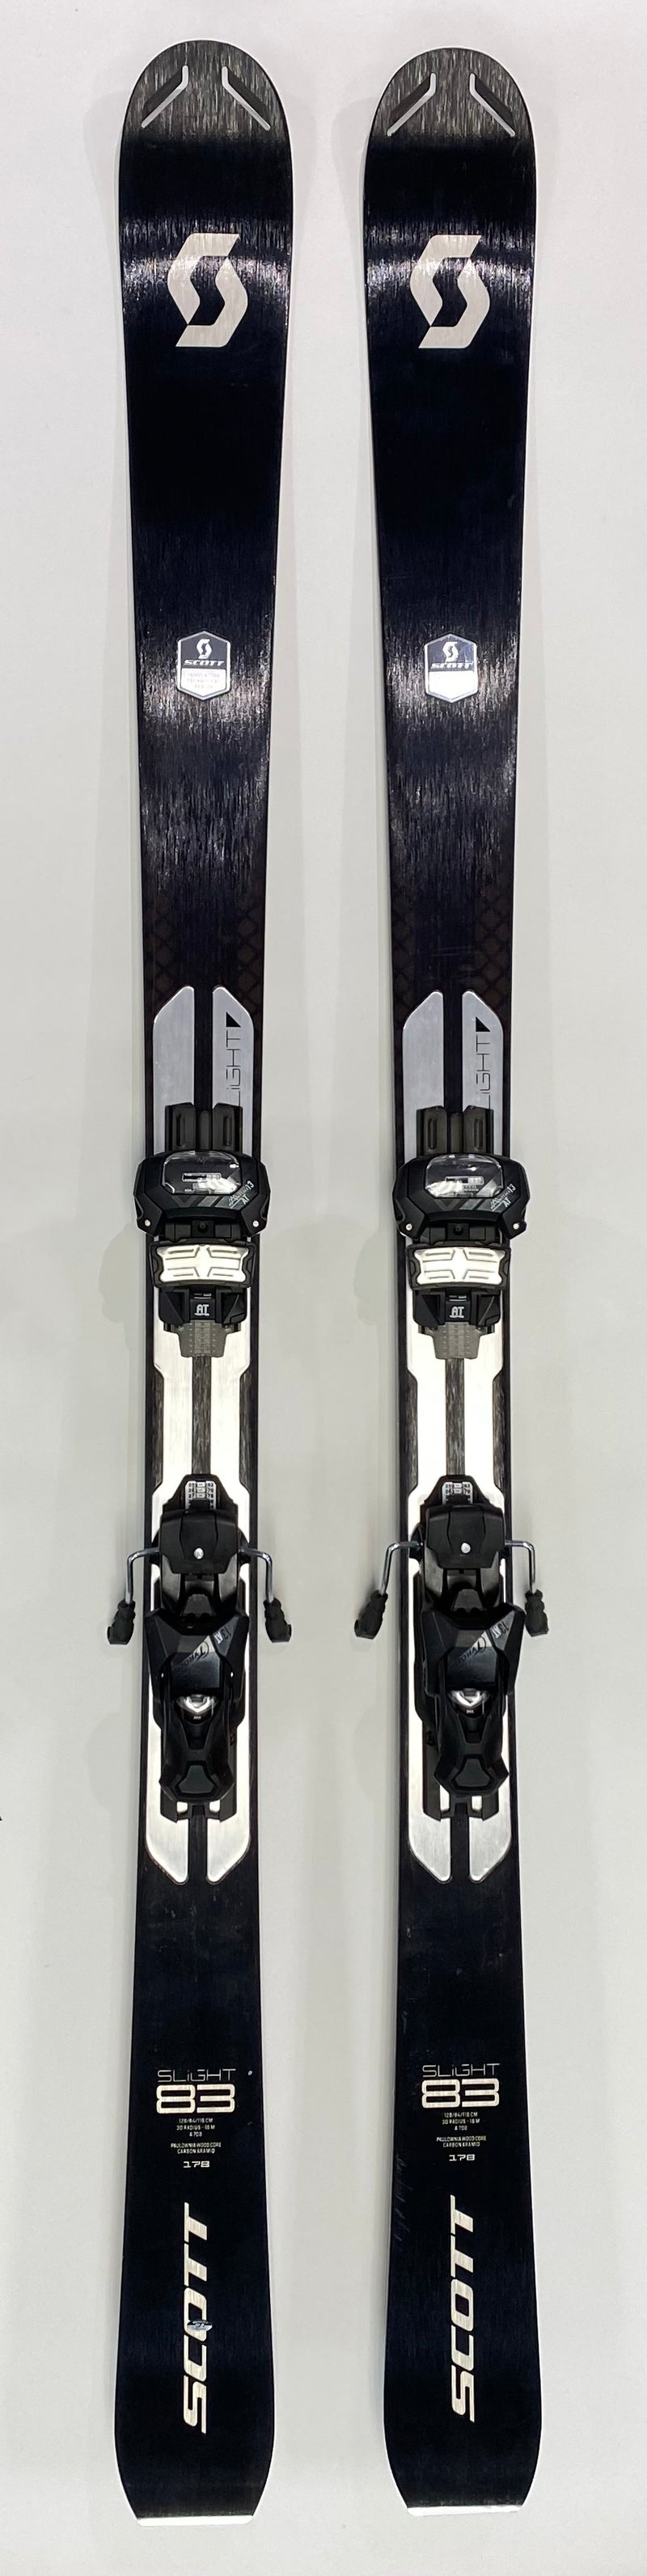 Load image into Gallery viewer, 2021/2022 Scott Slight 83 w/ Attack 13 Demo Bindings
